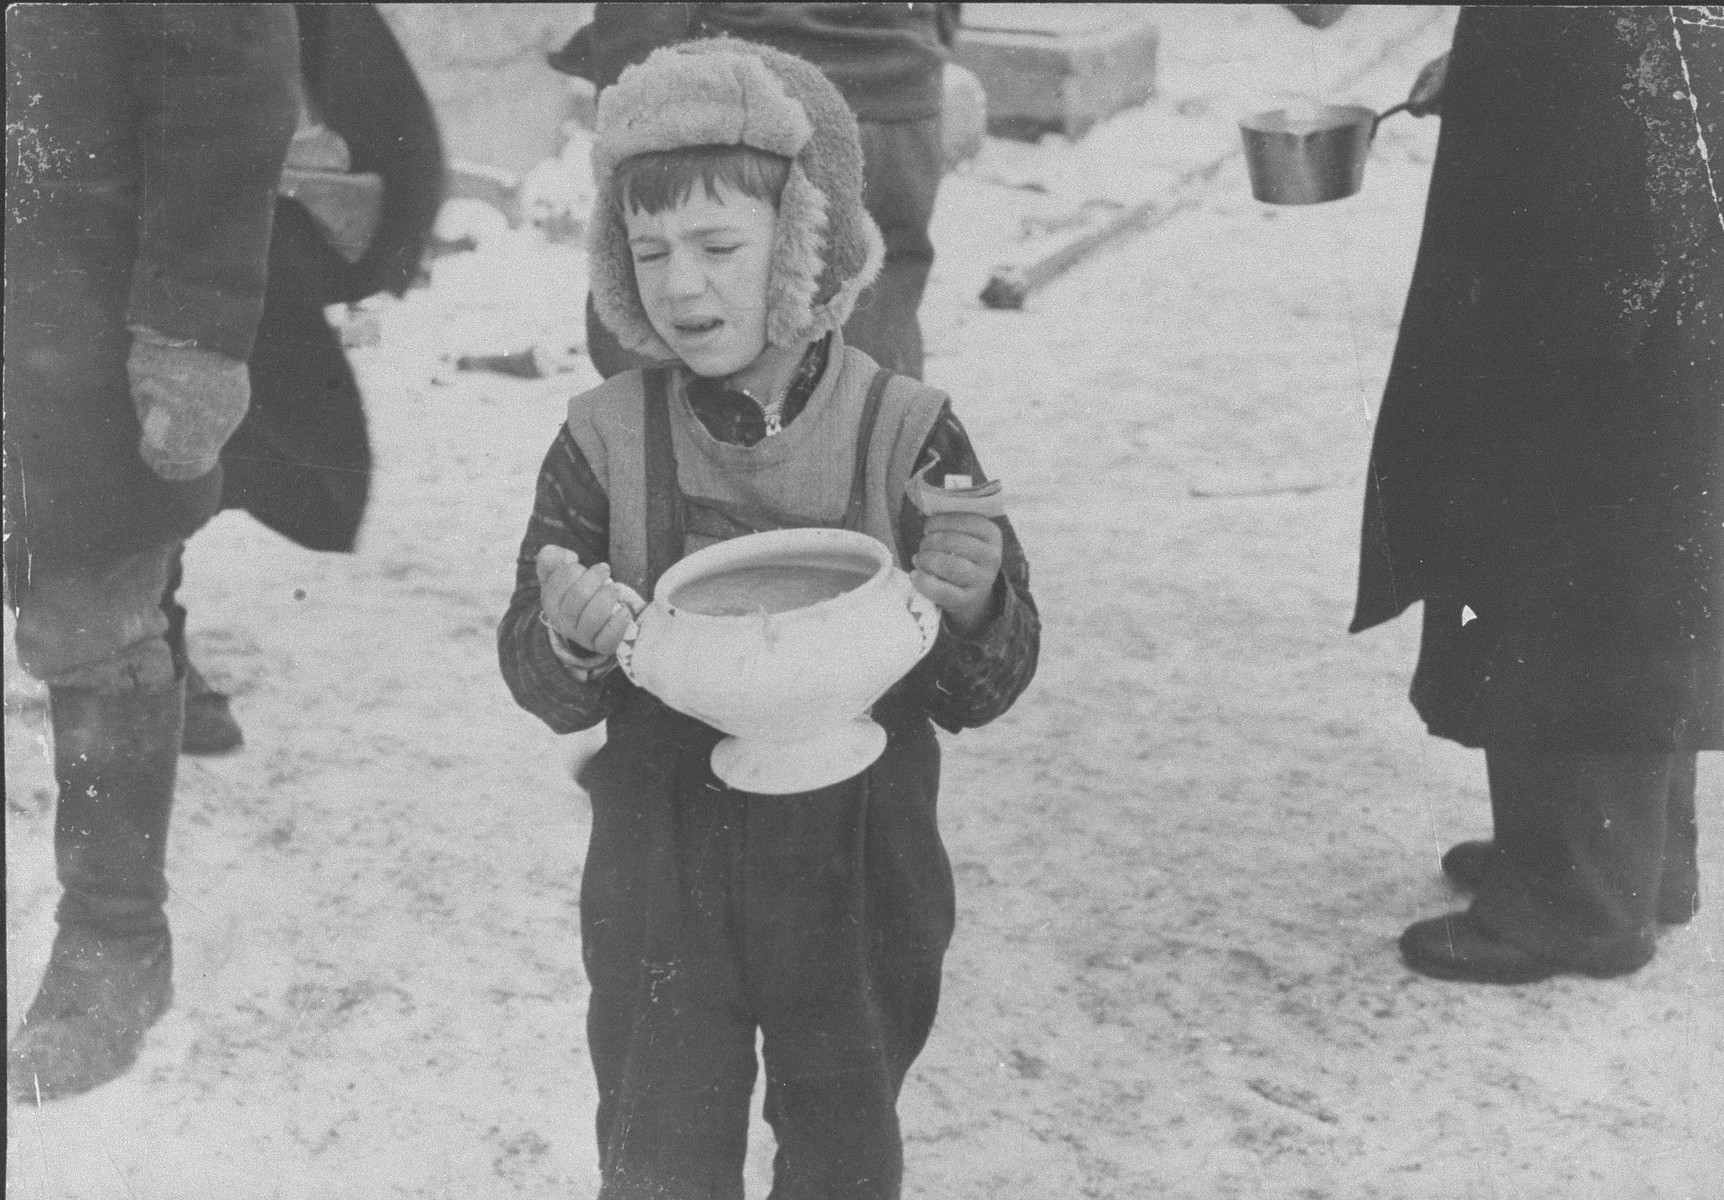 A young boy carrying a bowl of soup, holding food ration tickets.

According to Solly Ganor: "A five-year-old boy receives hot soup for the family from the ghetto soup kitchen. His father was murdered in the beginning of the war and the mother had to take care for the smaller children. The boy became the provider of the family. I saw him often standing at the corner trying to sell what was left of the family possessions. He was shot trying to escape from the Germans during the "Children's Action" on March 27, 1944."